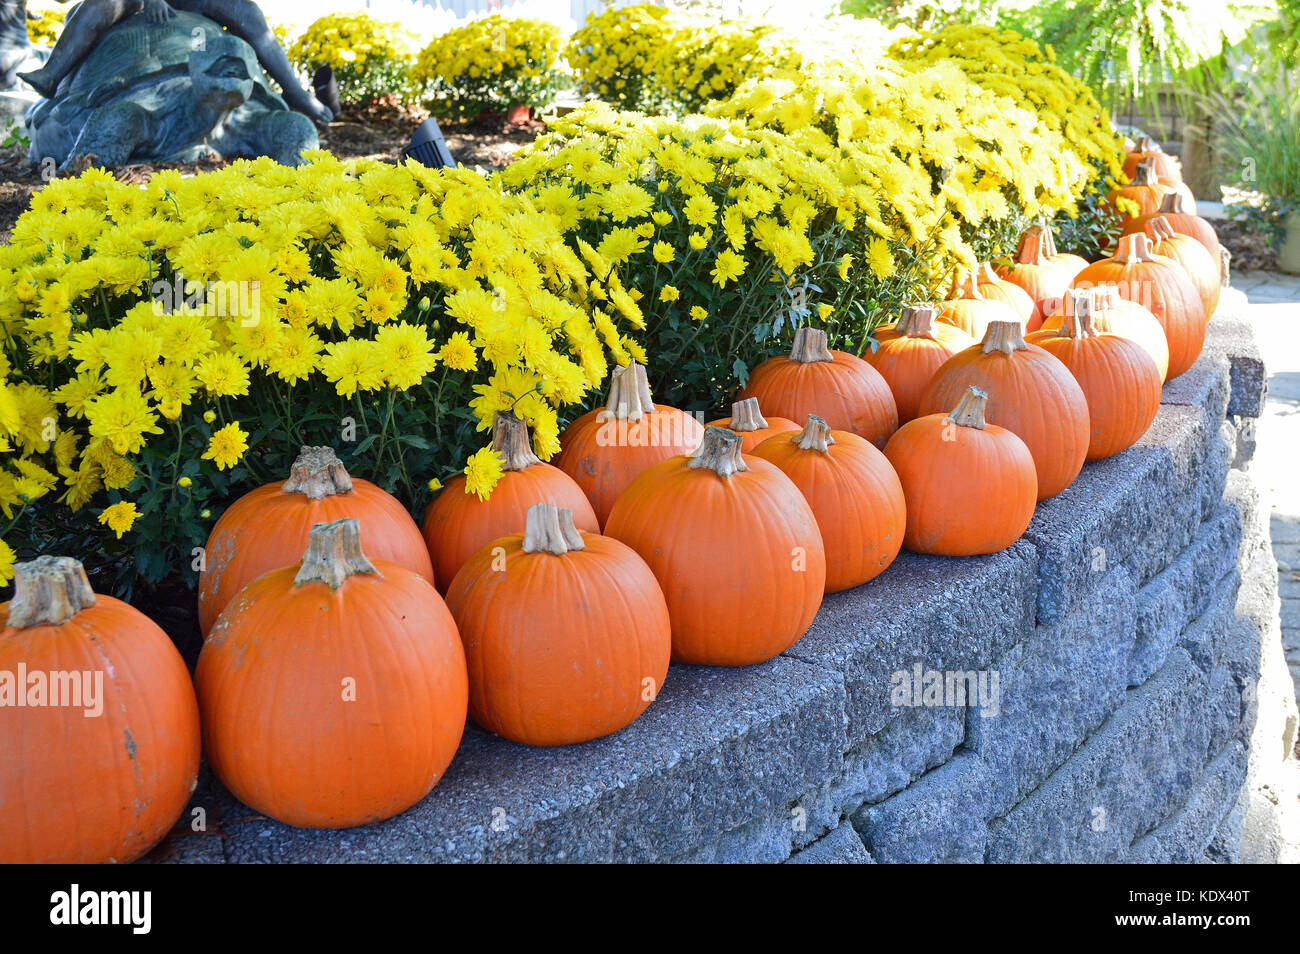 Displayed for the Autumn season, a photo of a decorative arrangement of flowers and pumpkins Stock Photo